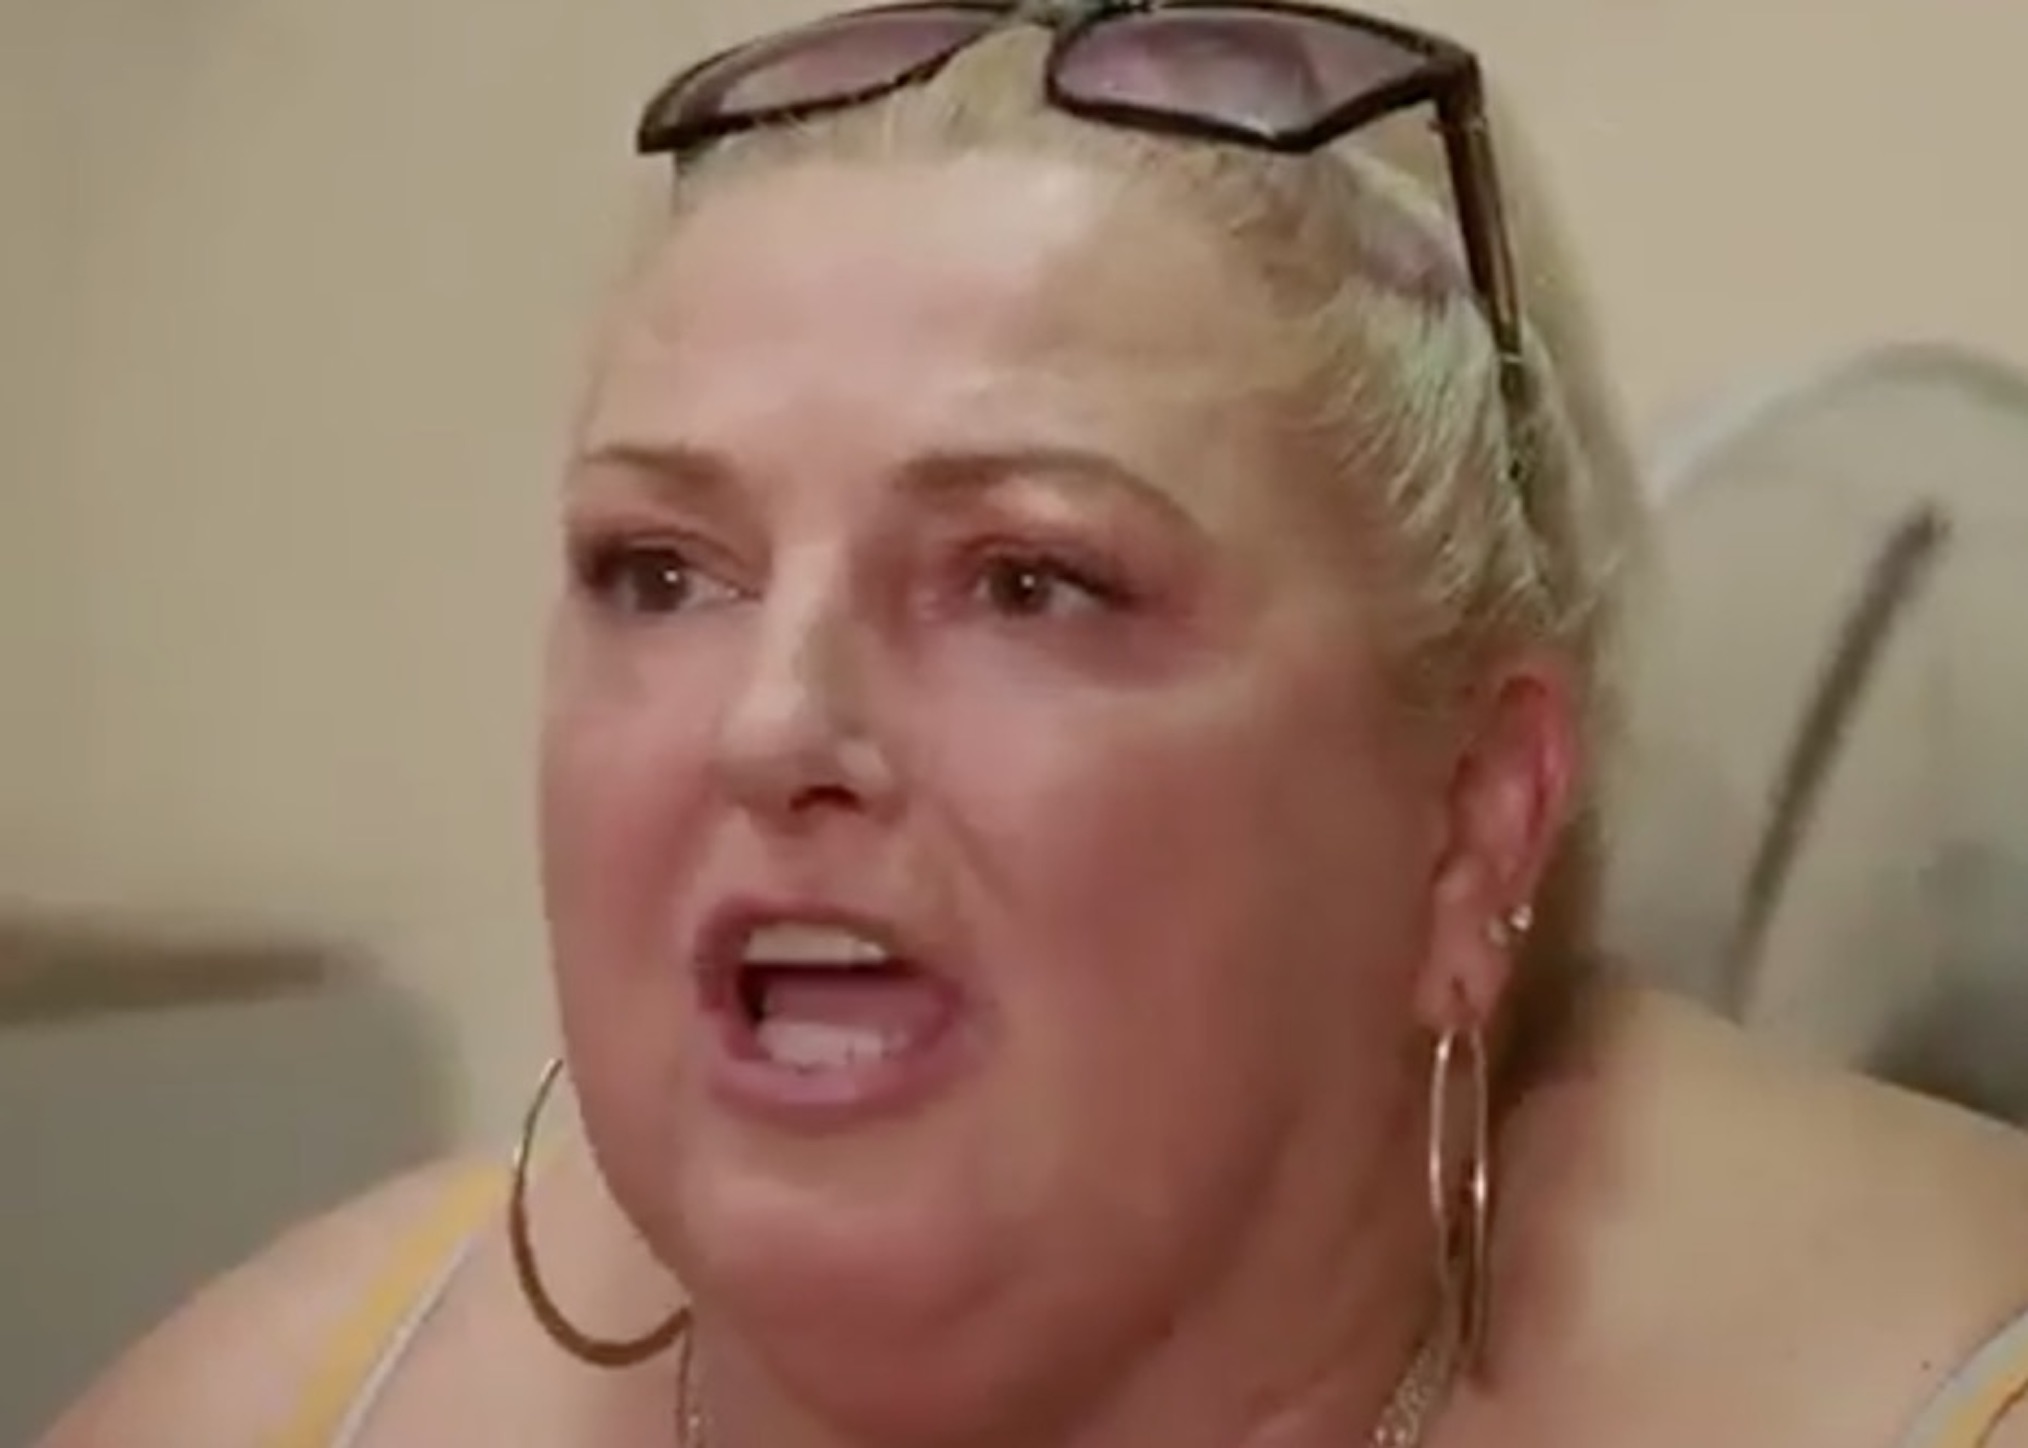 Angela_90 Day Fiancé; Happily Ever After